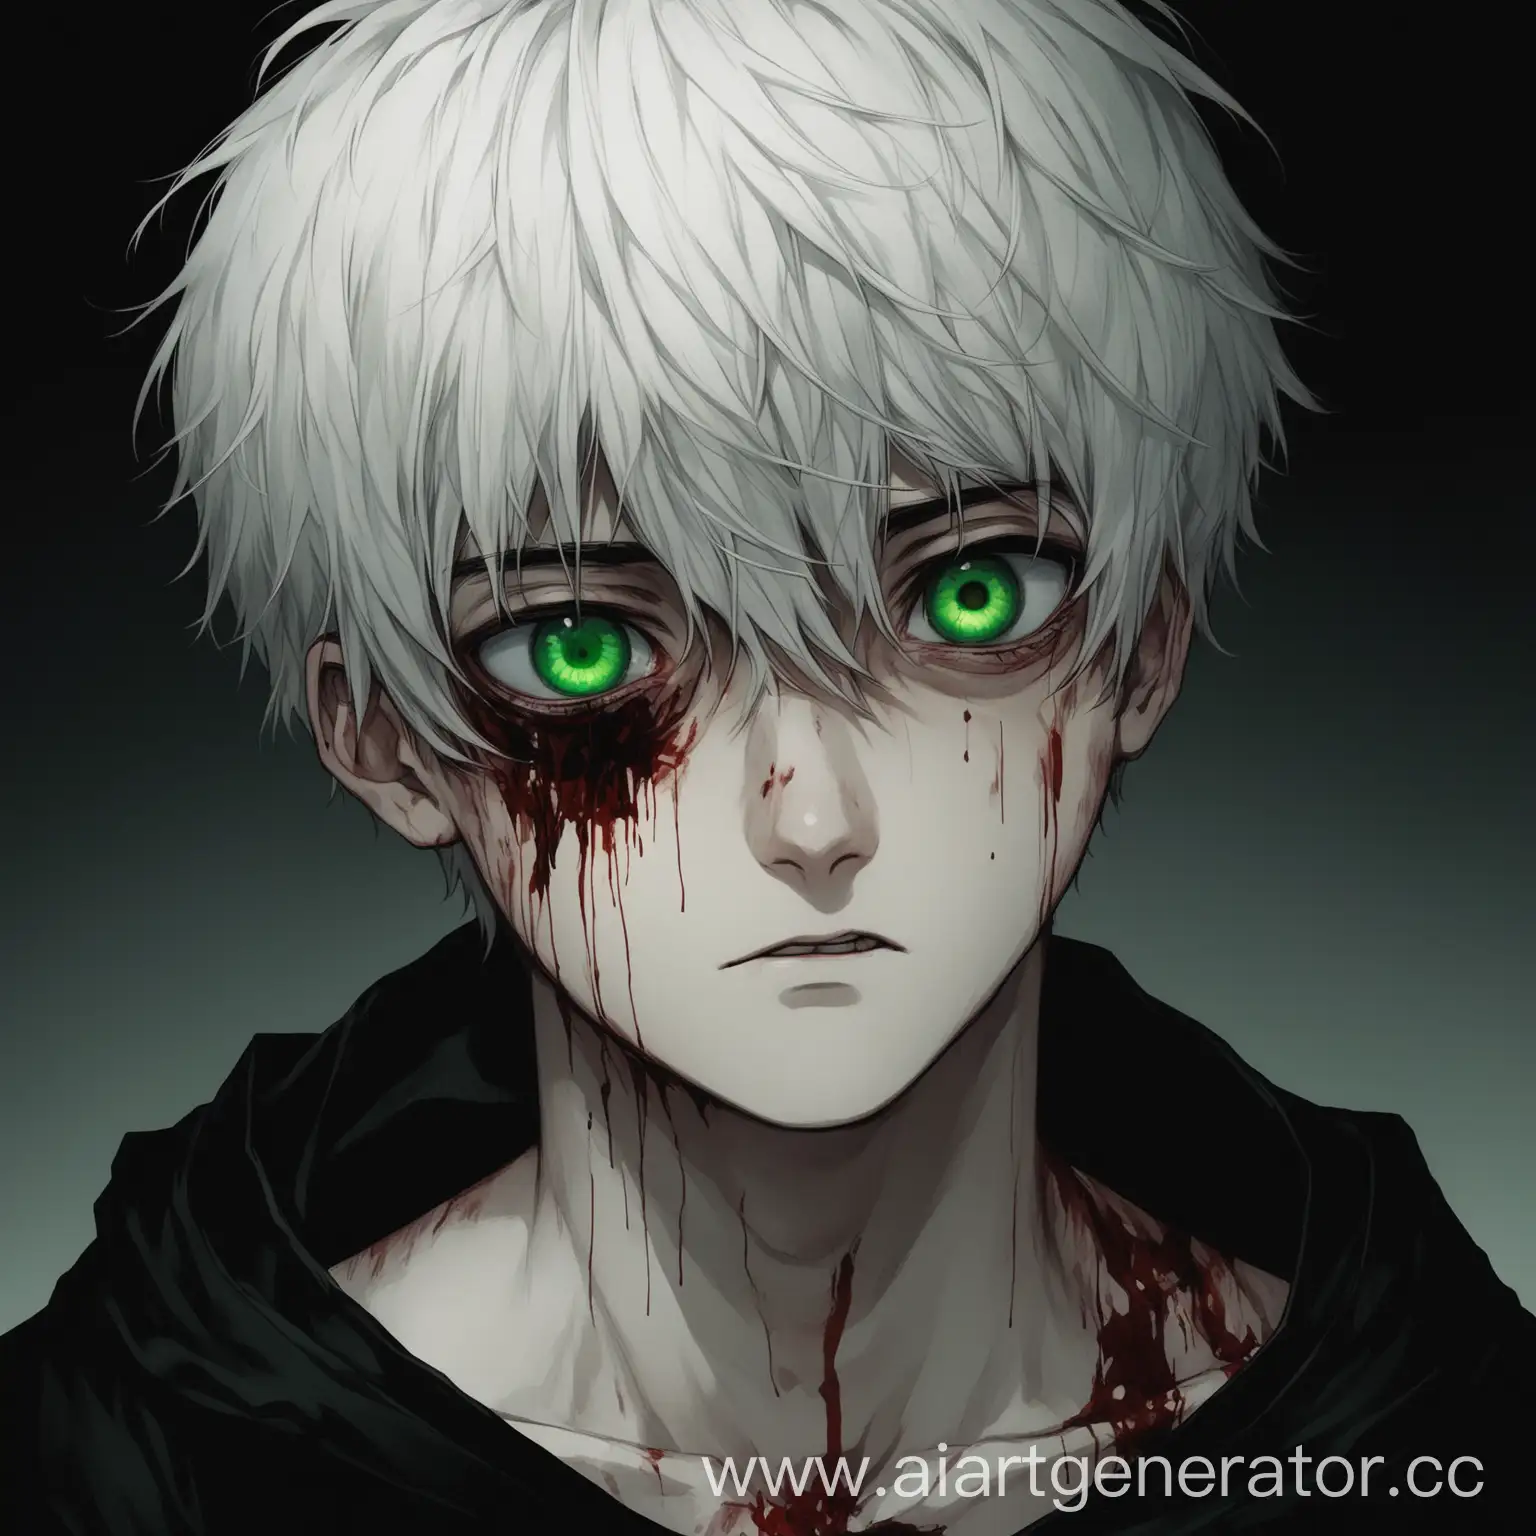 Young-Man-with-White-Hair-and-Green-Eyes-in-Distress